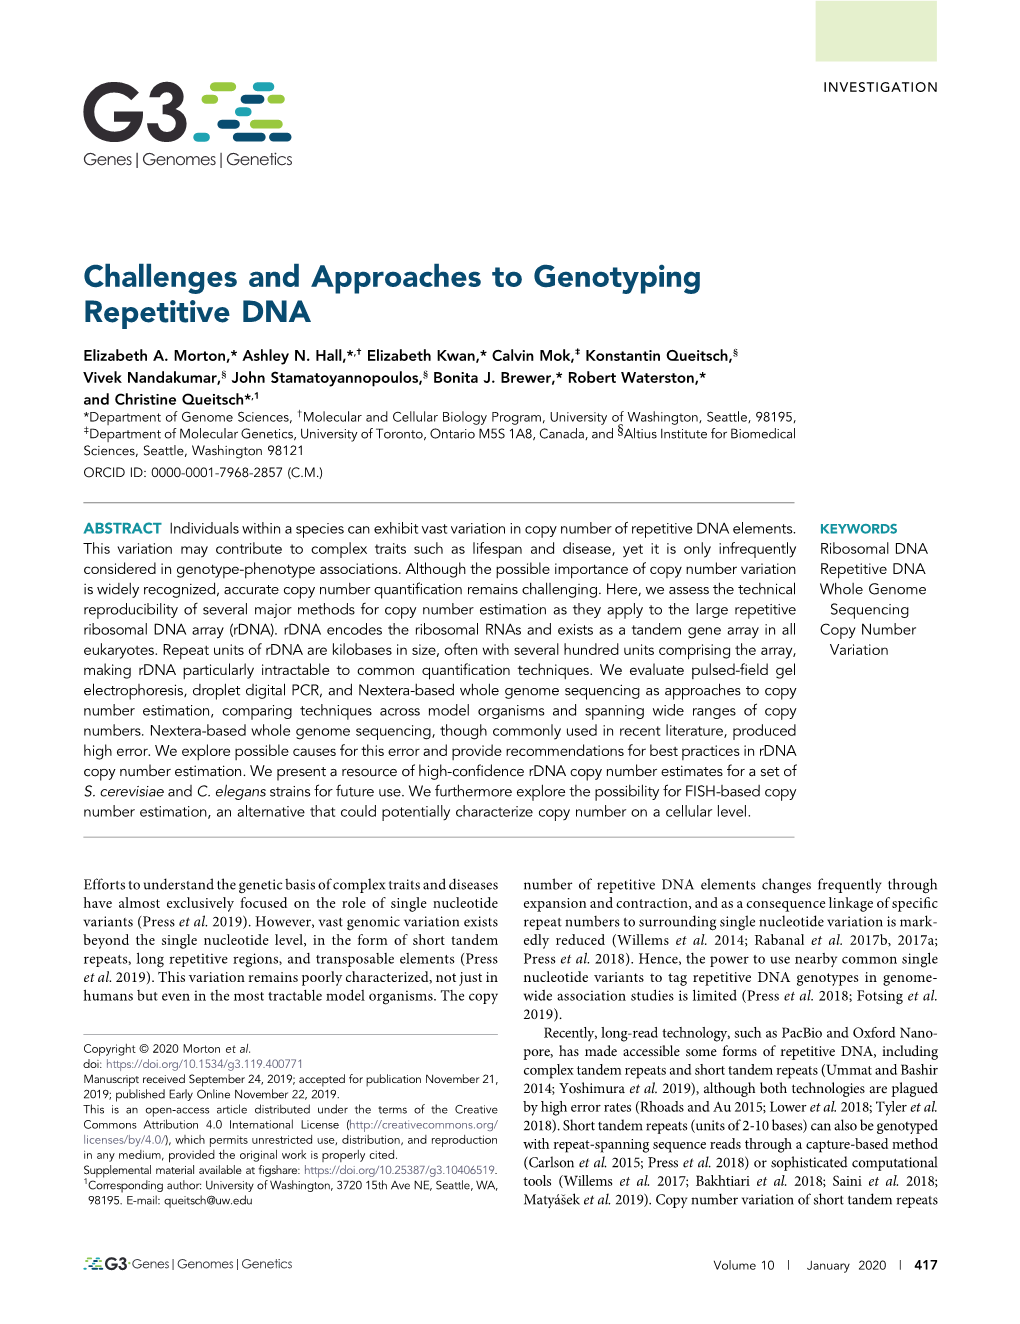 Challenges and Approaches to Genotyping Repetitive DNA